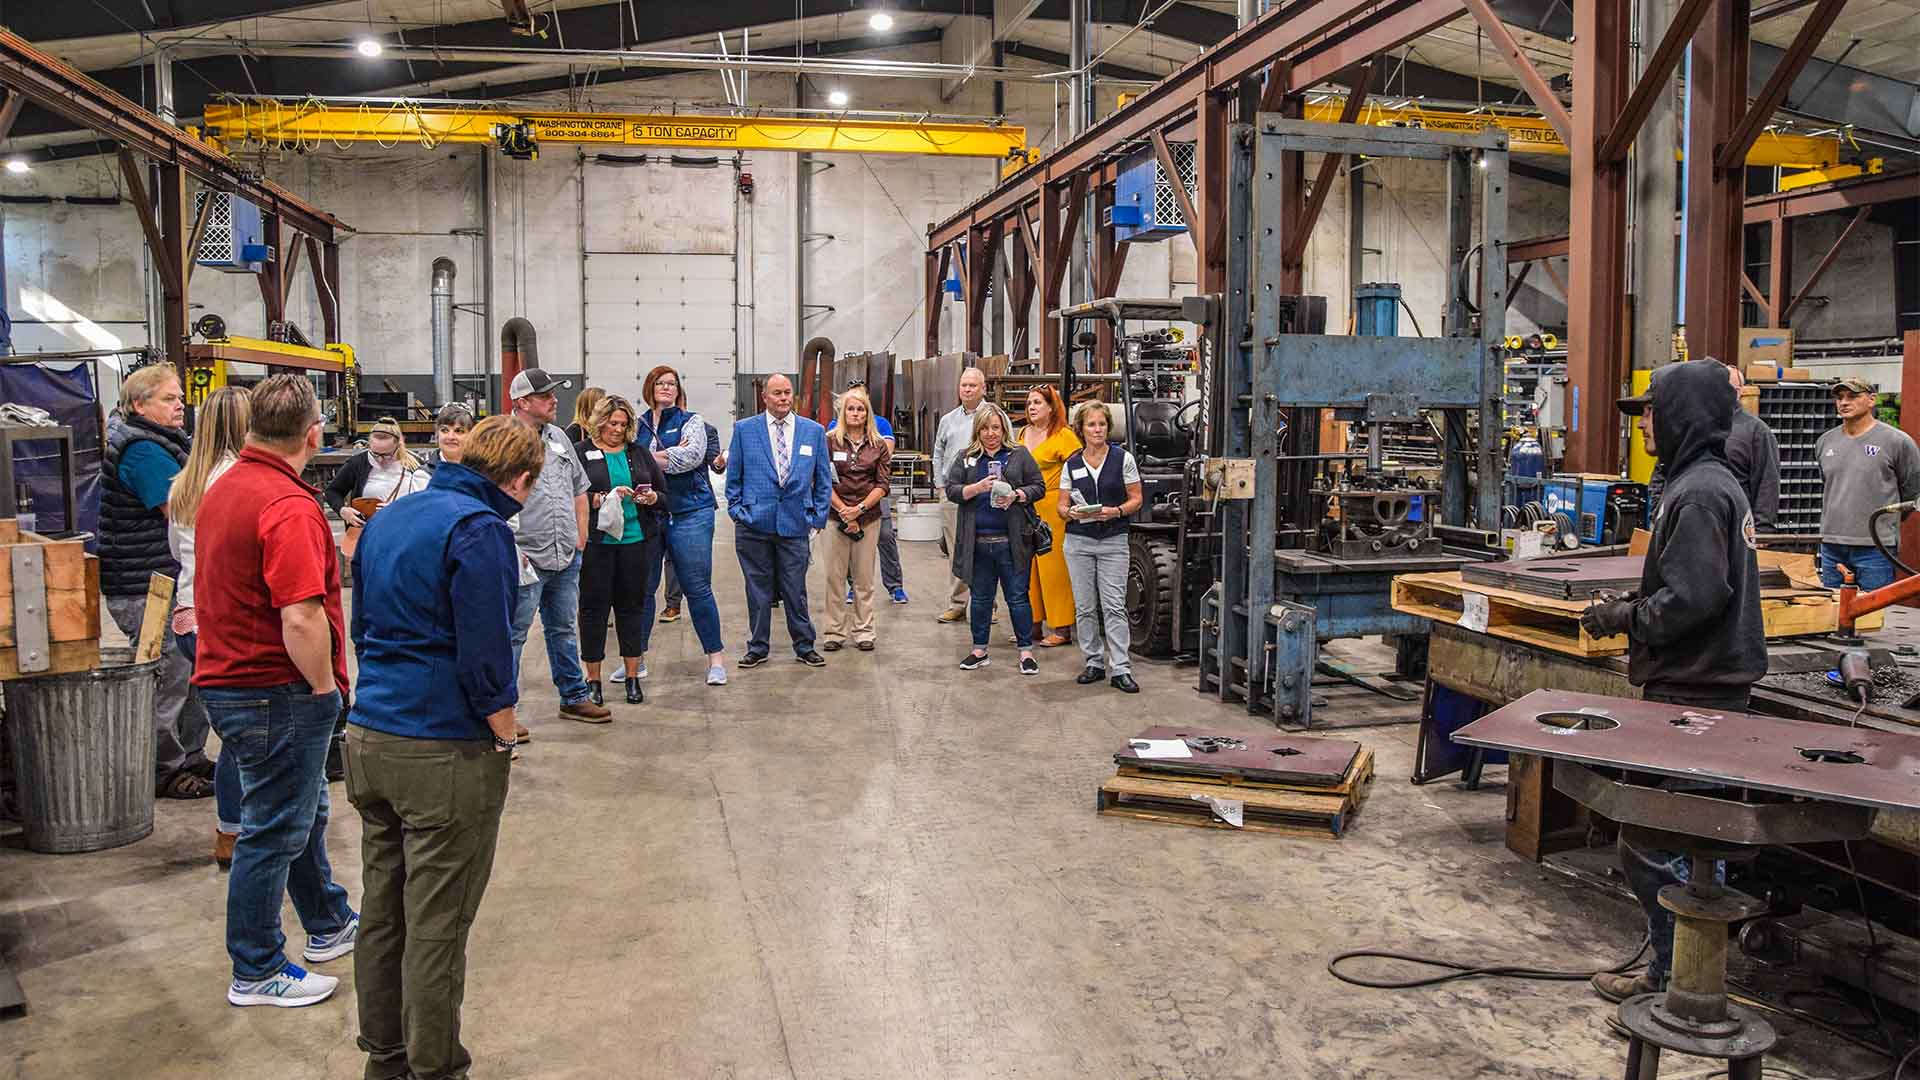 Attendees tour Vaughan Company during Elma Youth Apprenticeship Tours